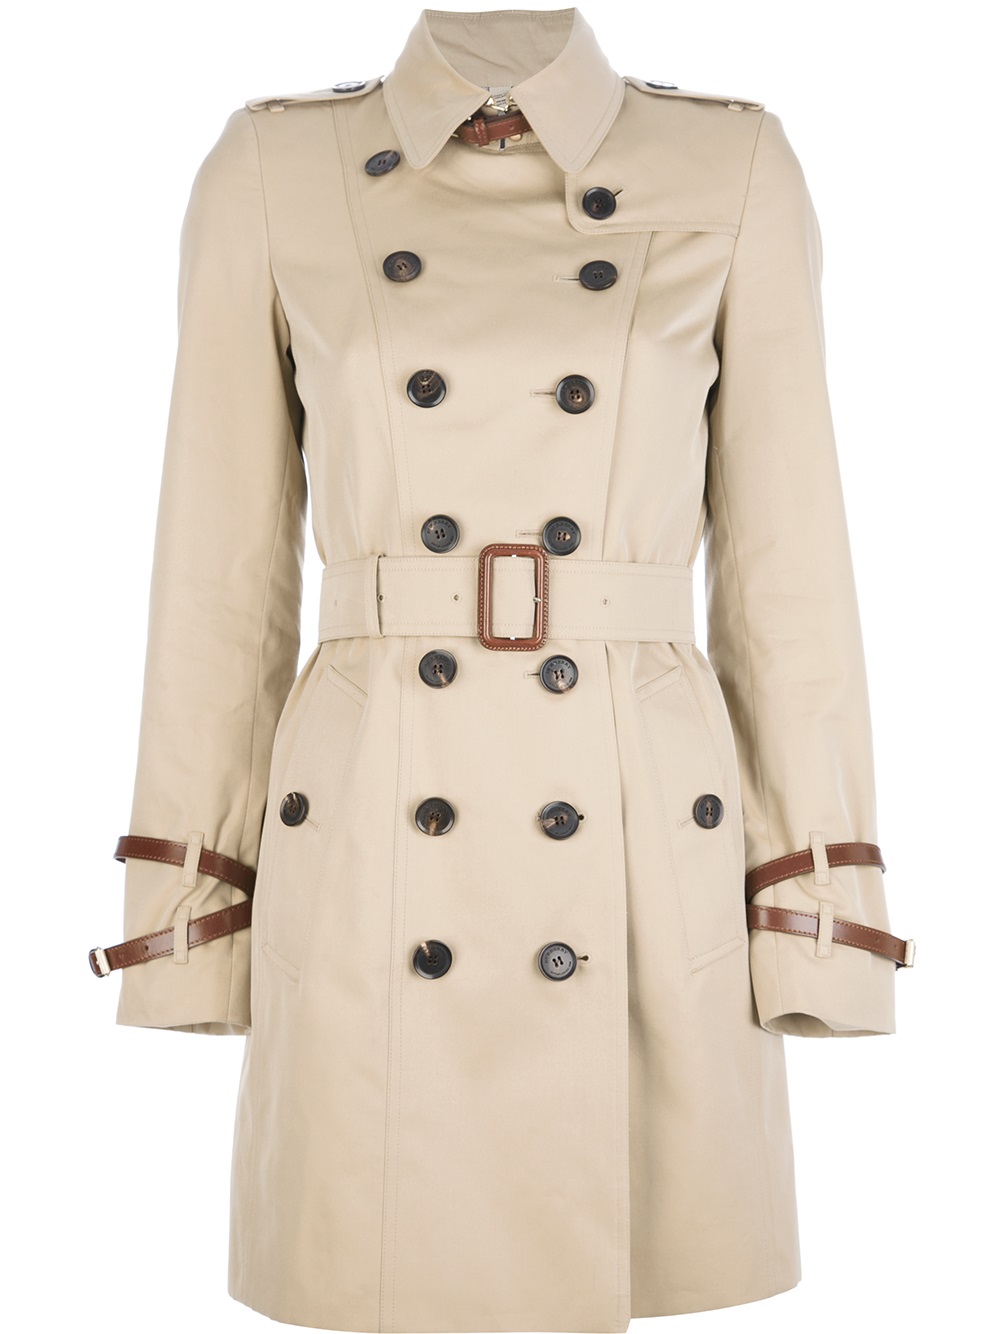 Lyst - Burberry Queens Borough Trench Coat in Natural